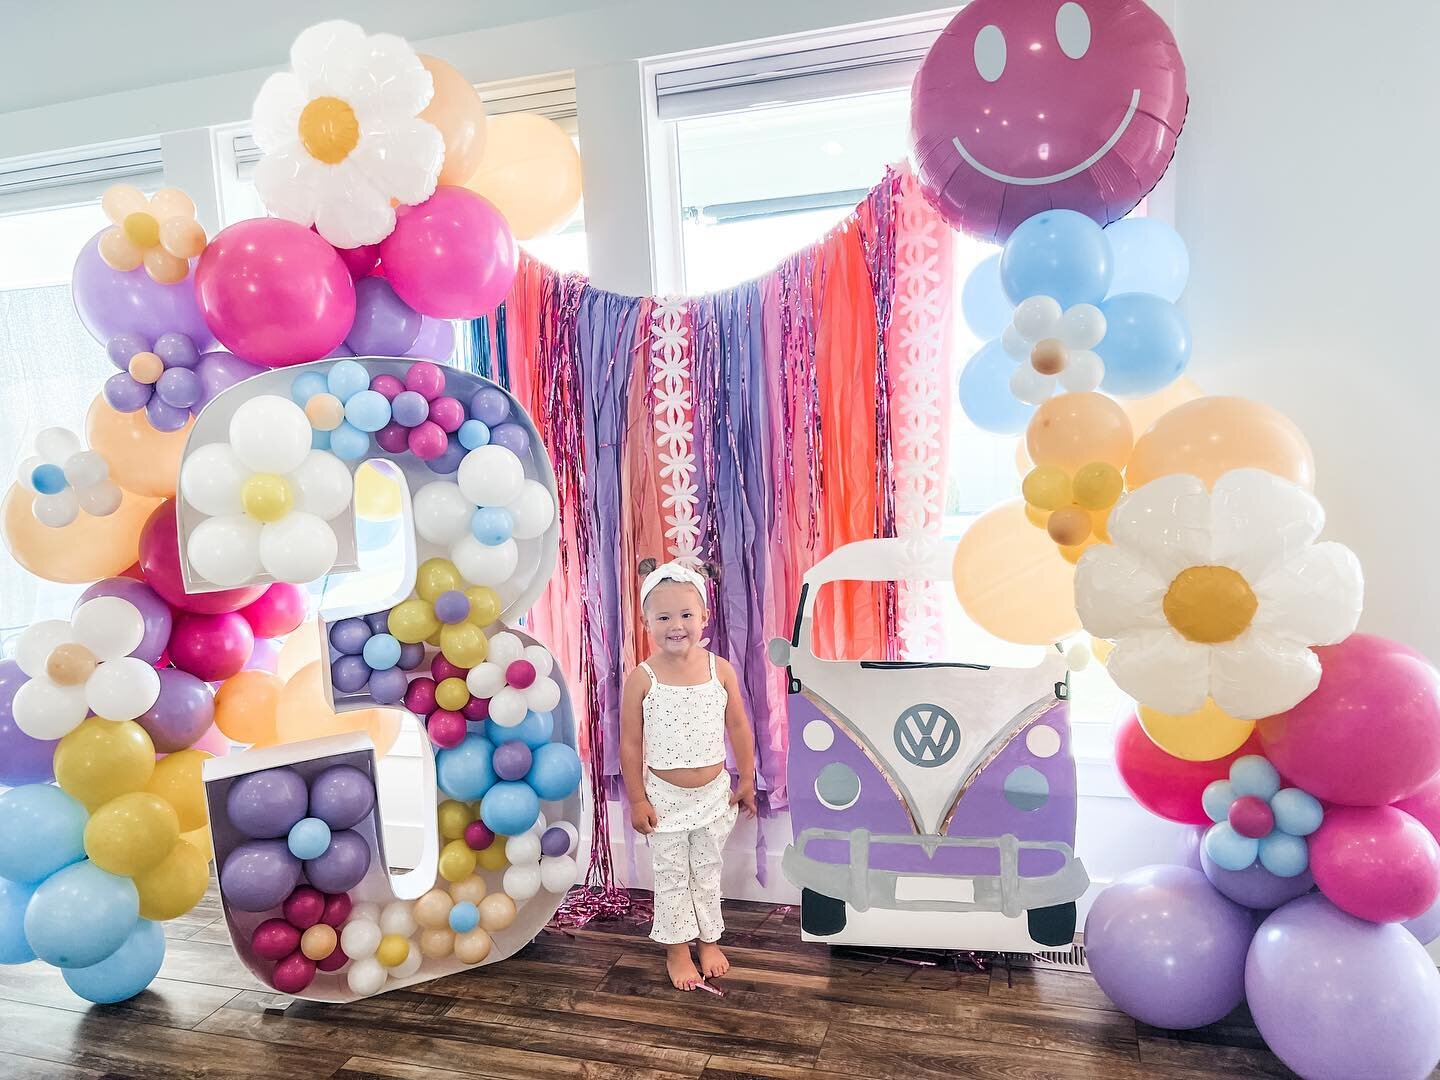 Have to go big when you&rsquo;re YOUNG, WILD, &amp; THREE! So easy to celebrate Stella girl. 

Also agree with @tuhsimms that birthdays are meant to be CELEBRATED!! 🤍💜🪩🌼